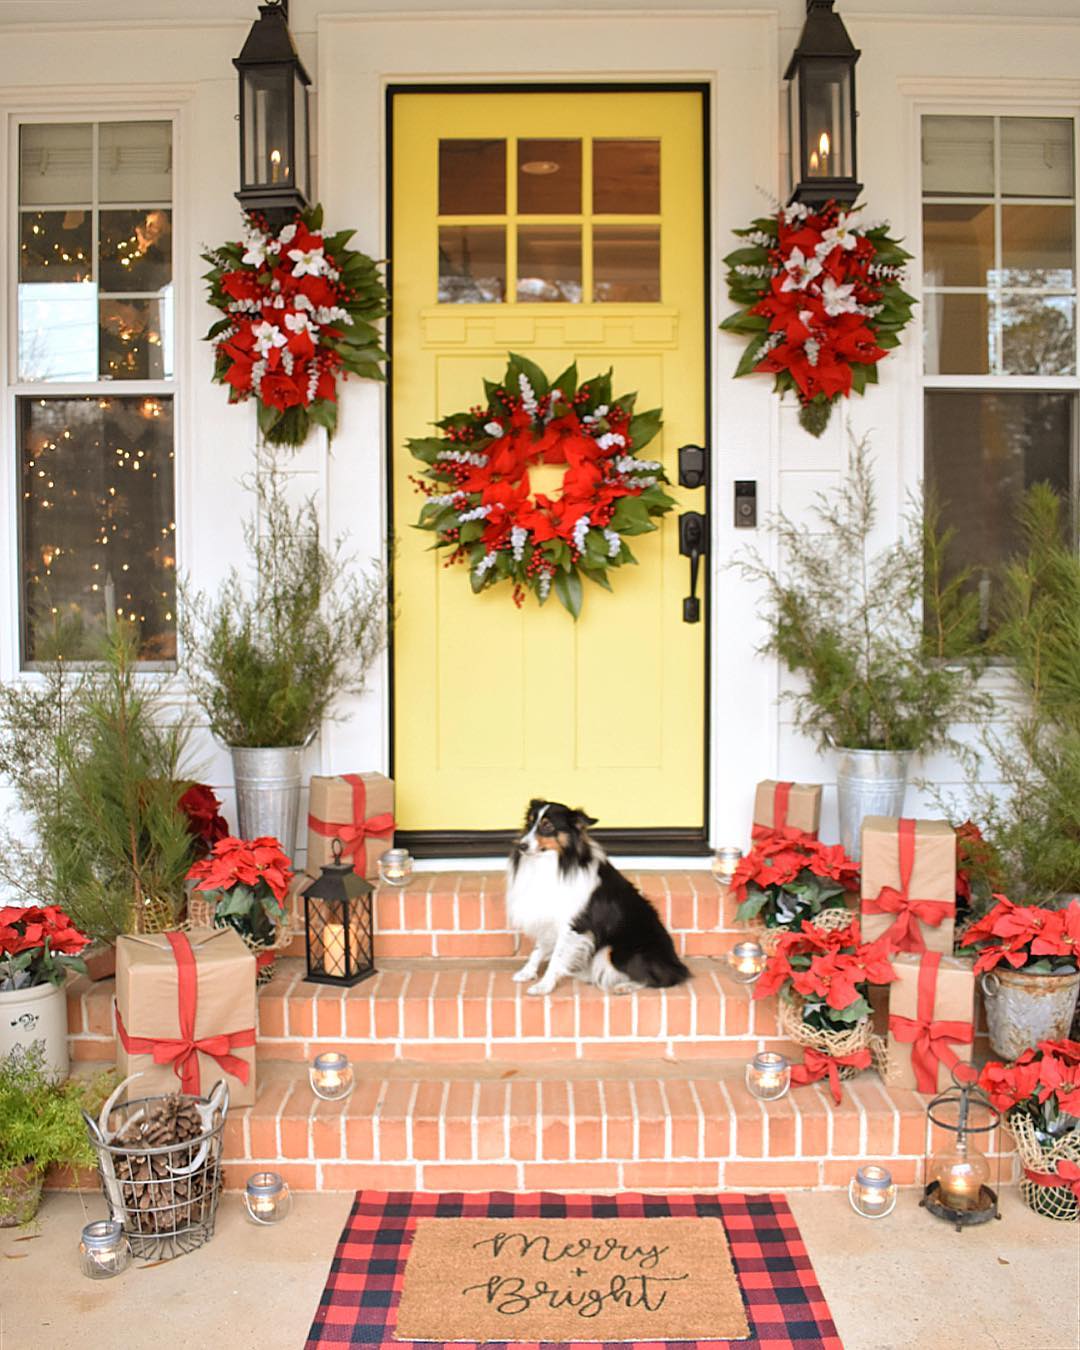 Yellow front door features a poinsetta and pine wreath, and two additional poinsettia wreathes hang from porch lanterns on either side of the door. A dog is sitting on the steps between various other planters with pine- and holiday-related decorations. Photo by Instagram user @simplysoutherncottage.